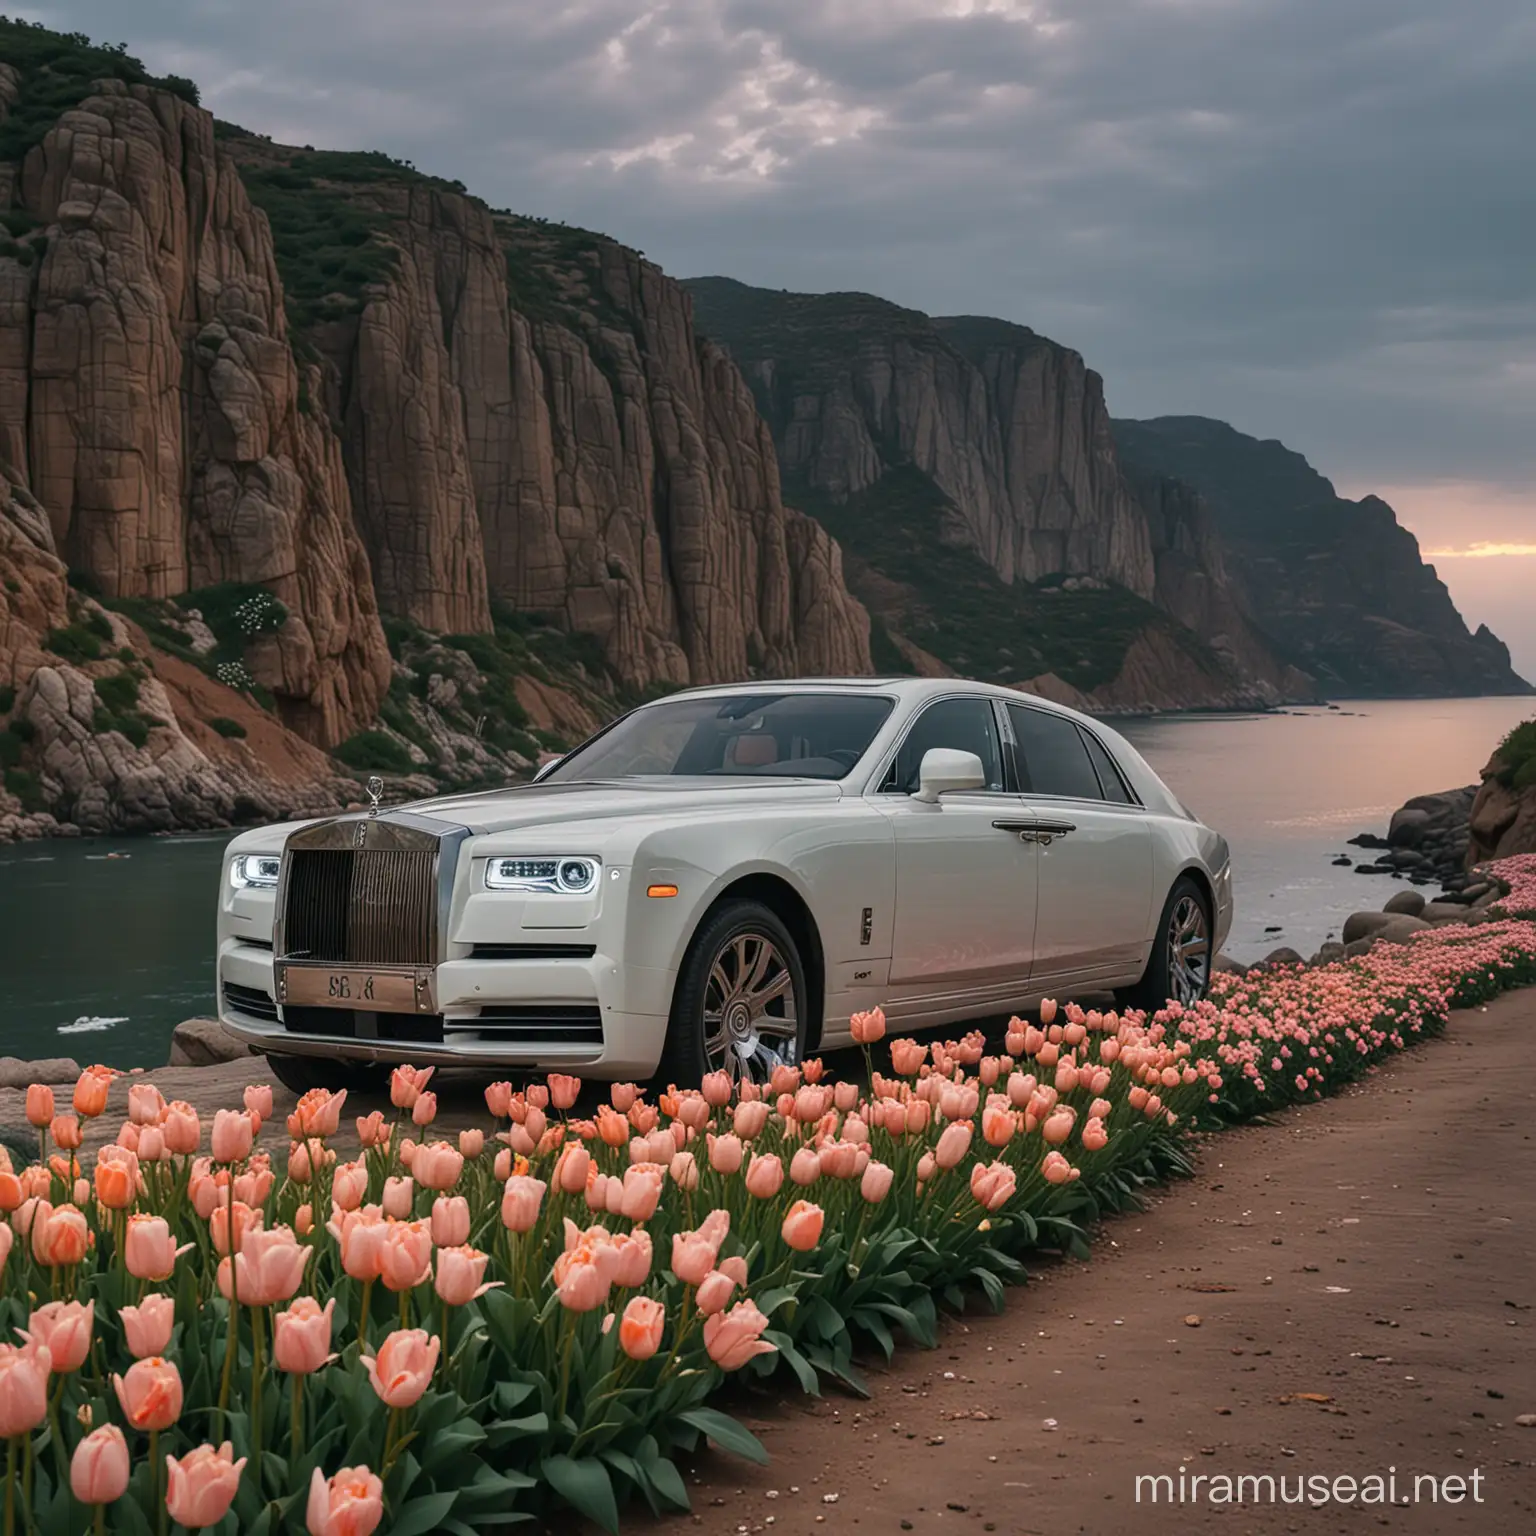 ultra detailed, 8k, real size body Saudi tycoon wear whiten robe standing on right  of  2020 type  real scale tall  height Rolls Royce 20 meters Extended superlong  lux Silver Phantom , parked on a sharp cliff seaside  , Blooming with peonies and tulips，green leaves,with a cheetah crouching beside him, watching Riyadh set off dazzling fireworks，autumn early night  , clearsky, cloudy,